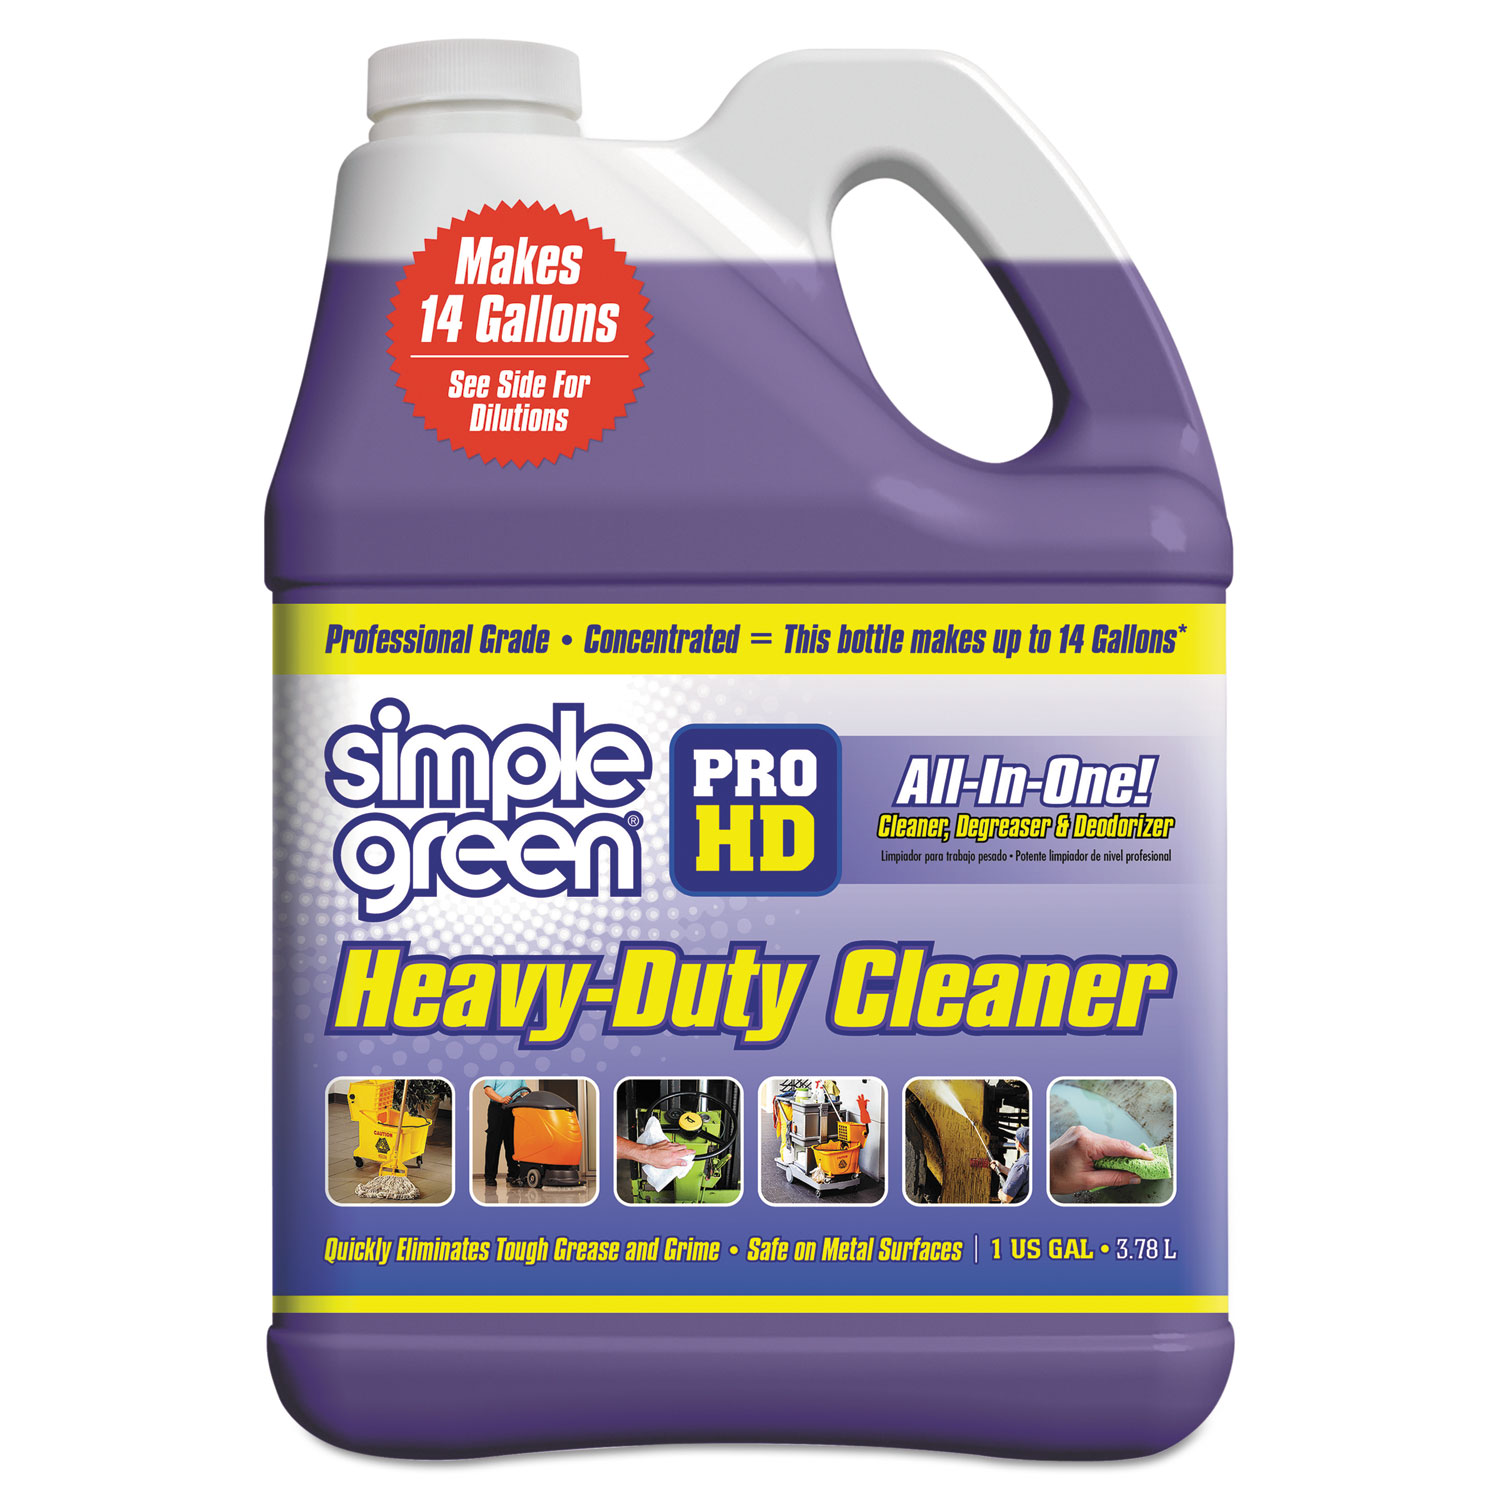 hdcleaner review